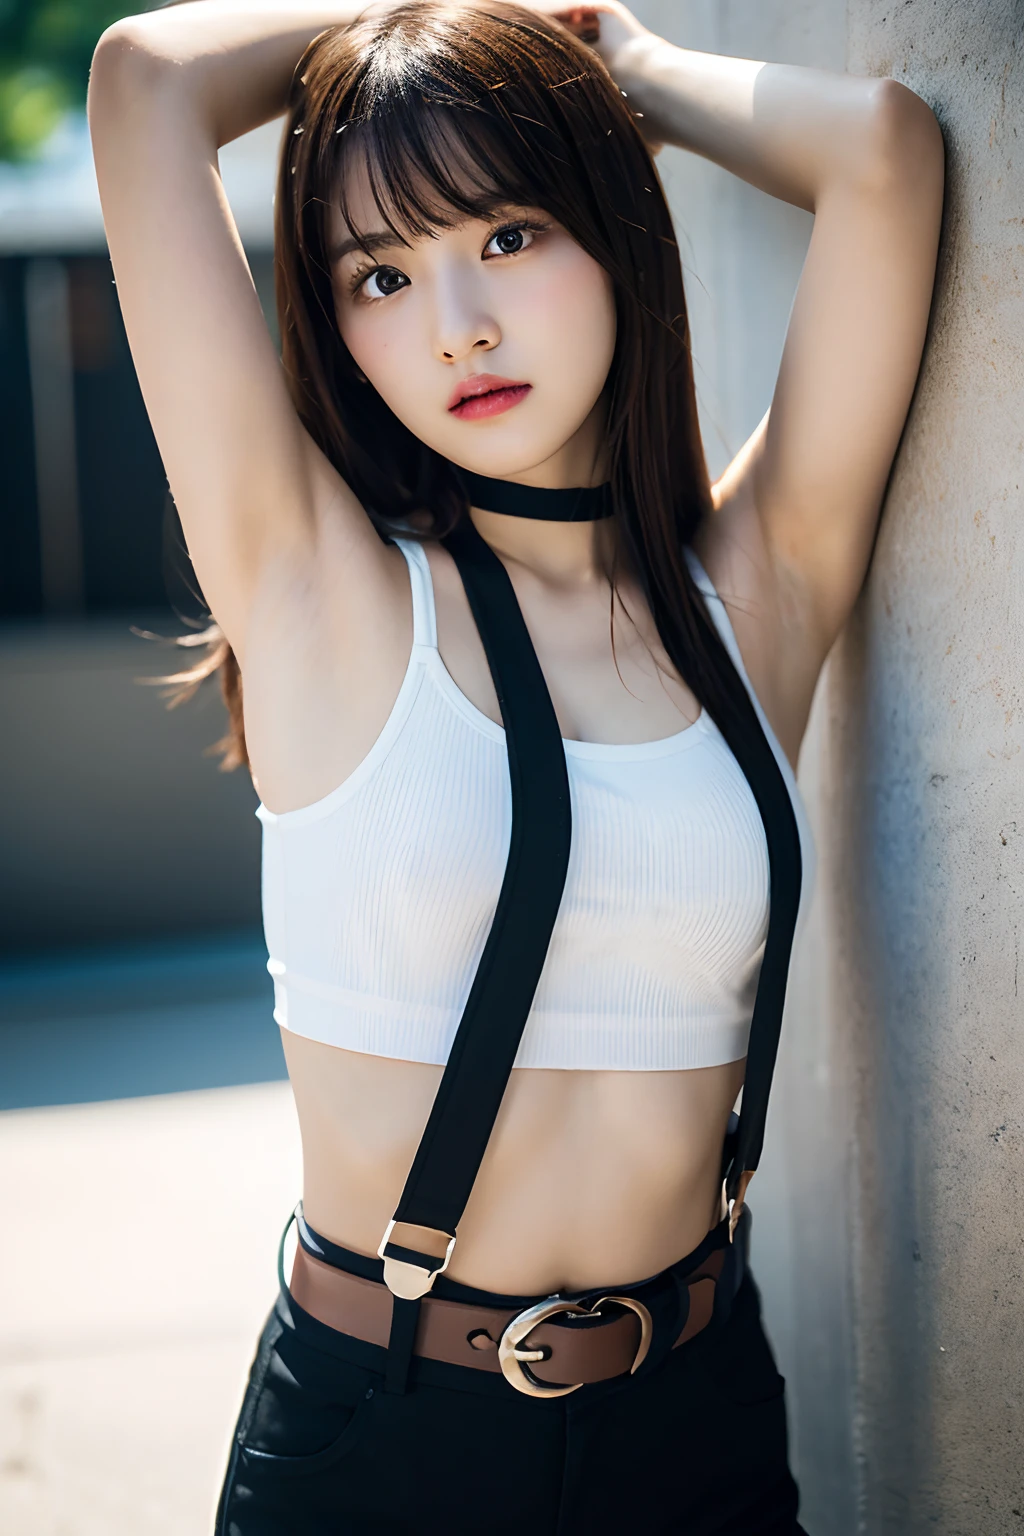 ​masterpiece、flat-colors、depth of fields、lens flare 1 girl、、Brown hair、watching at viewers　　　　a belt　black suspenders　　　Puffy breasts　　　 　 Armpit sweat　perspiring　Side of both hands　　walls: 　Black pants, 　Gaze　　　Small face　Bangs Upper Eyes　flank